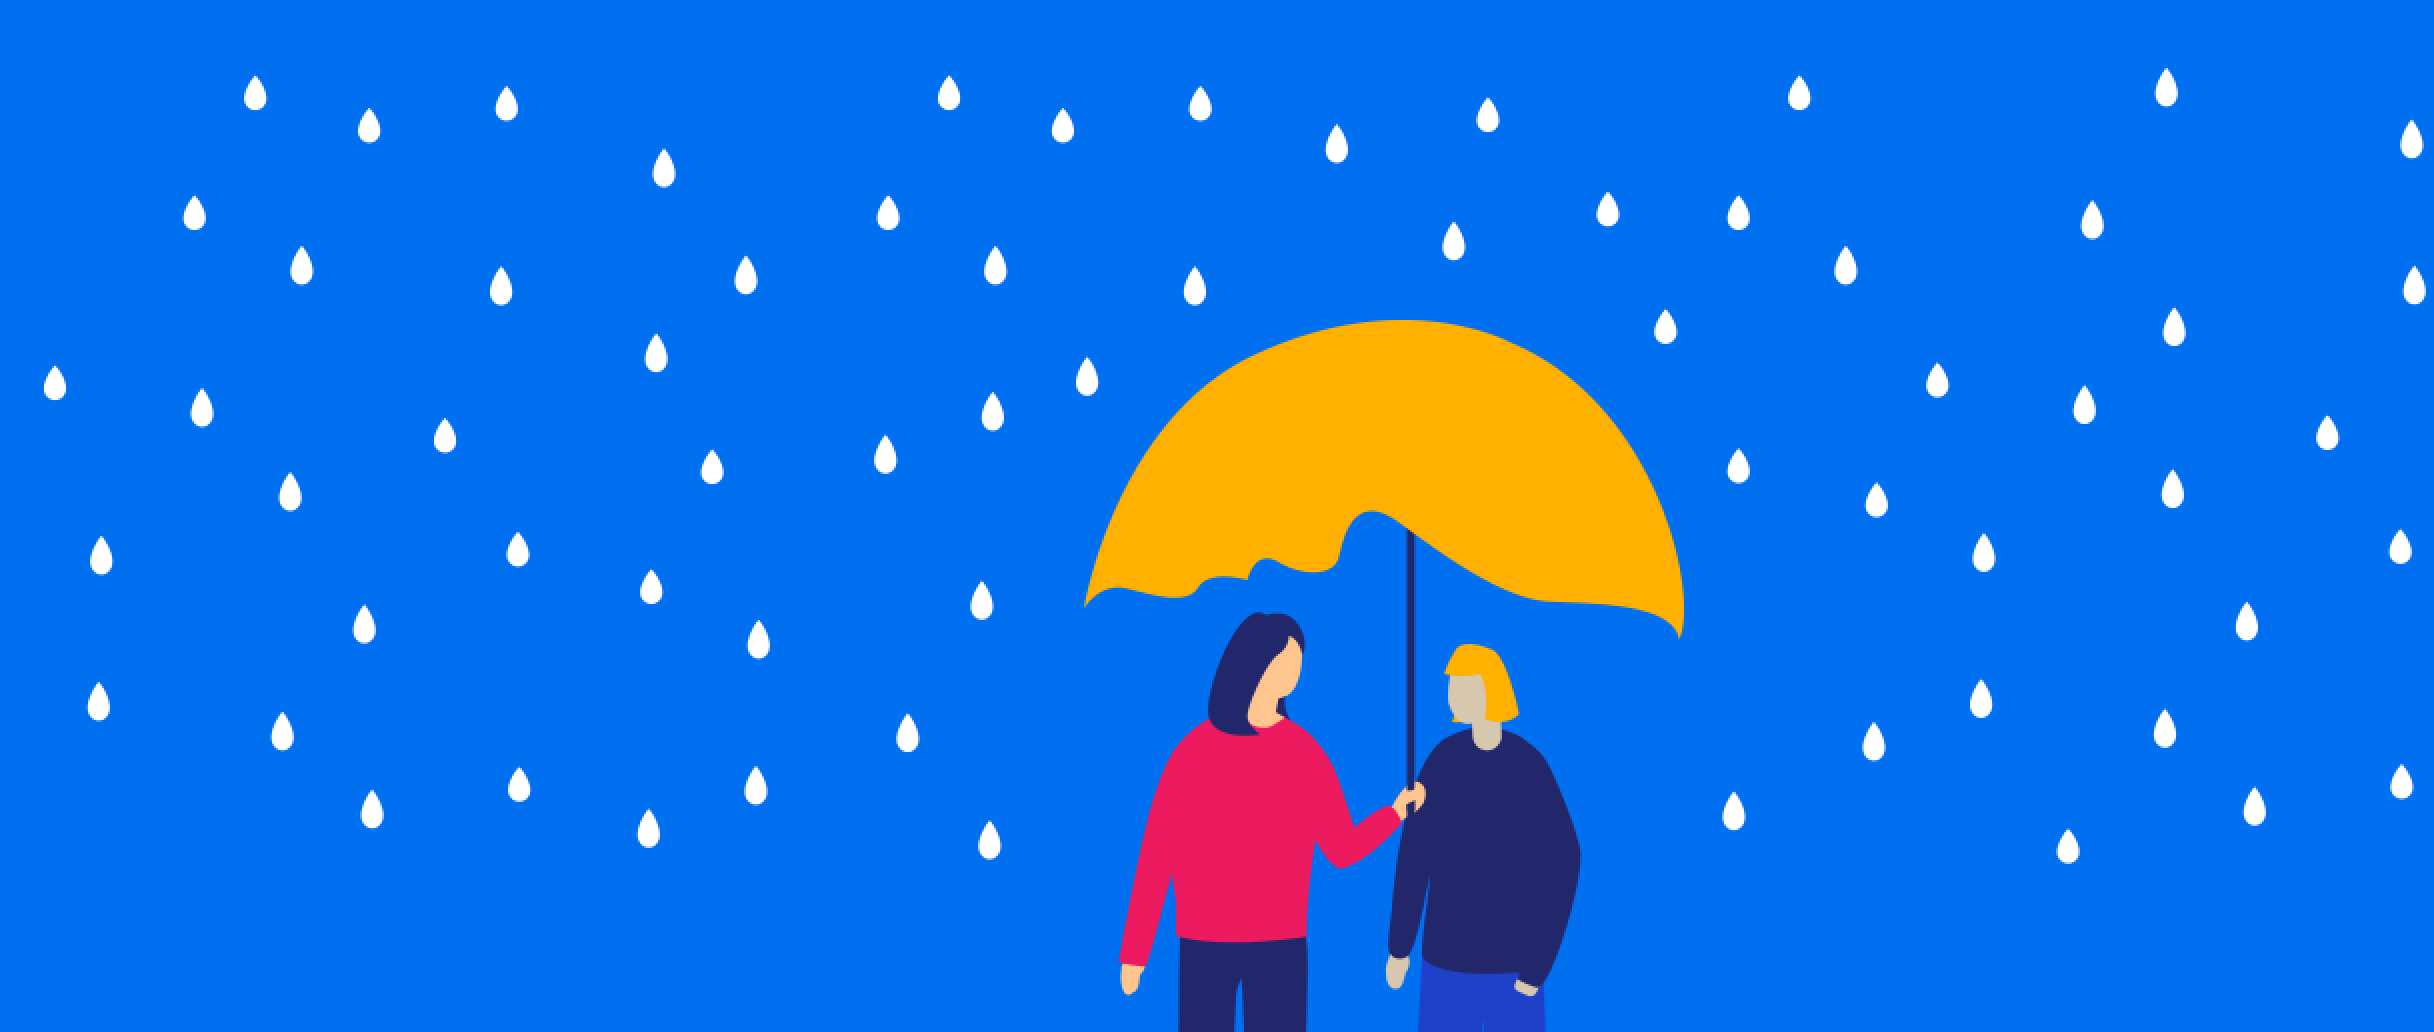 Illustration of woman holding an umbrella for herself and a friend in the rain